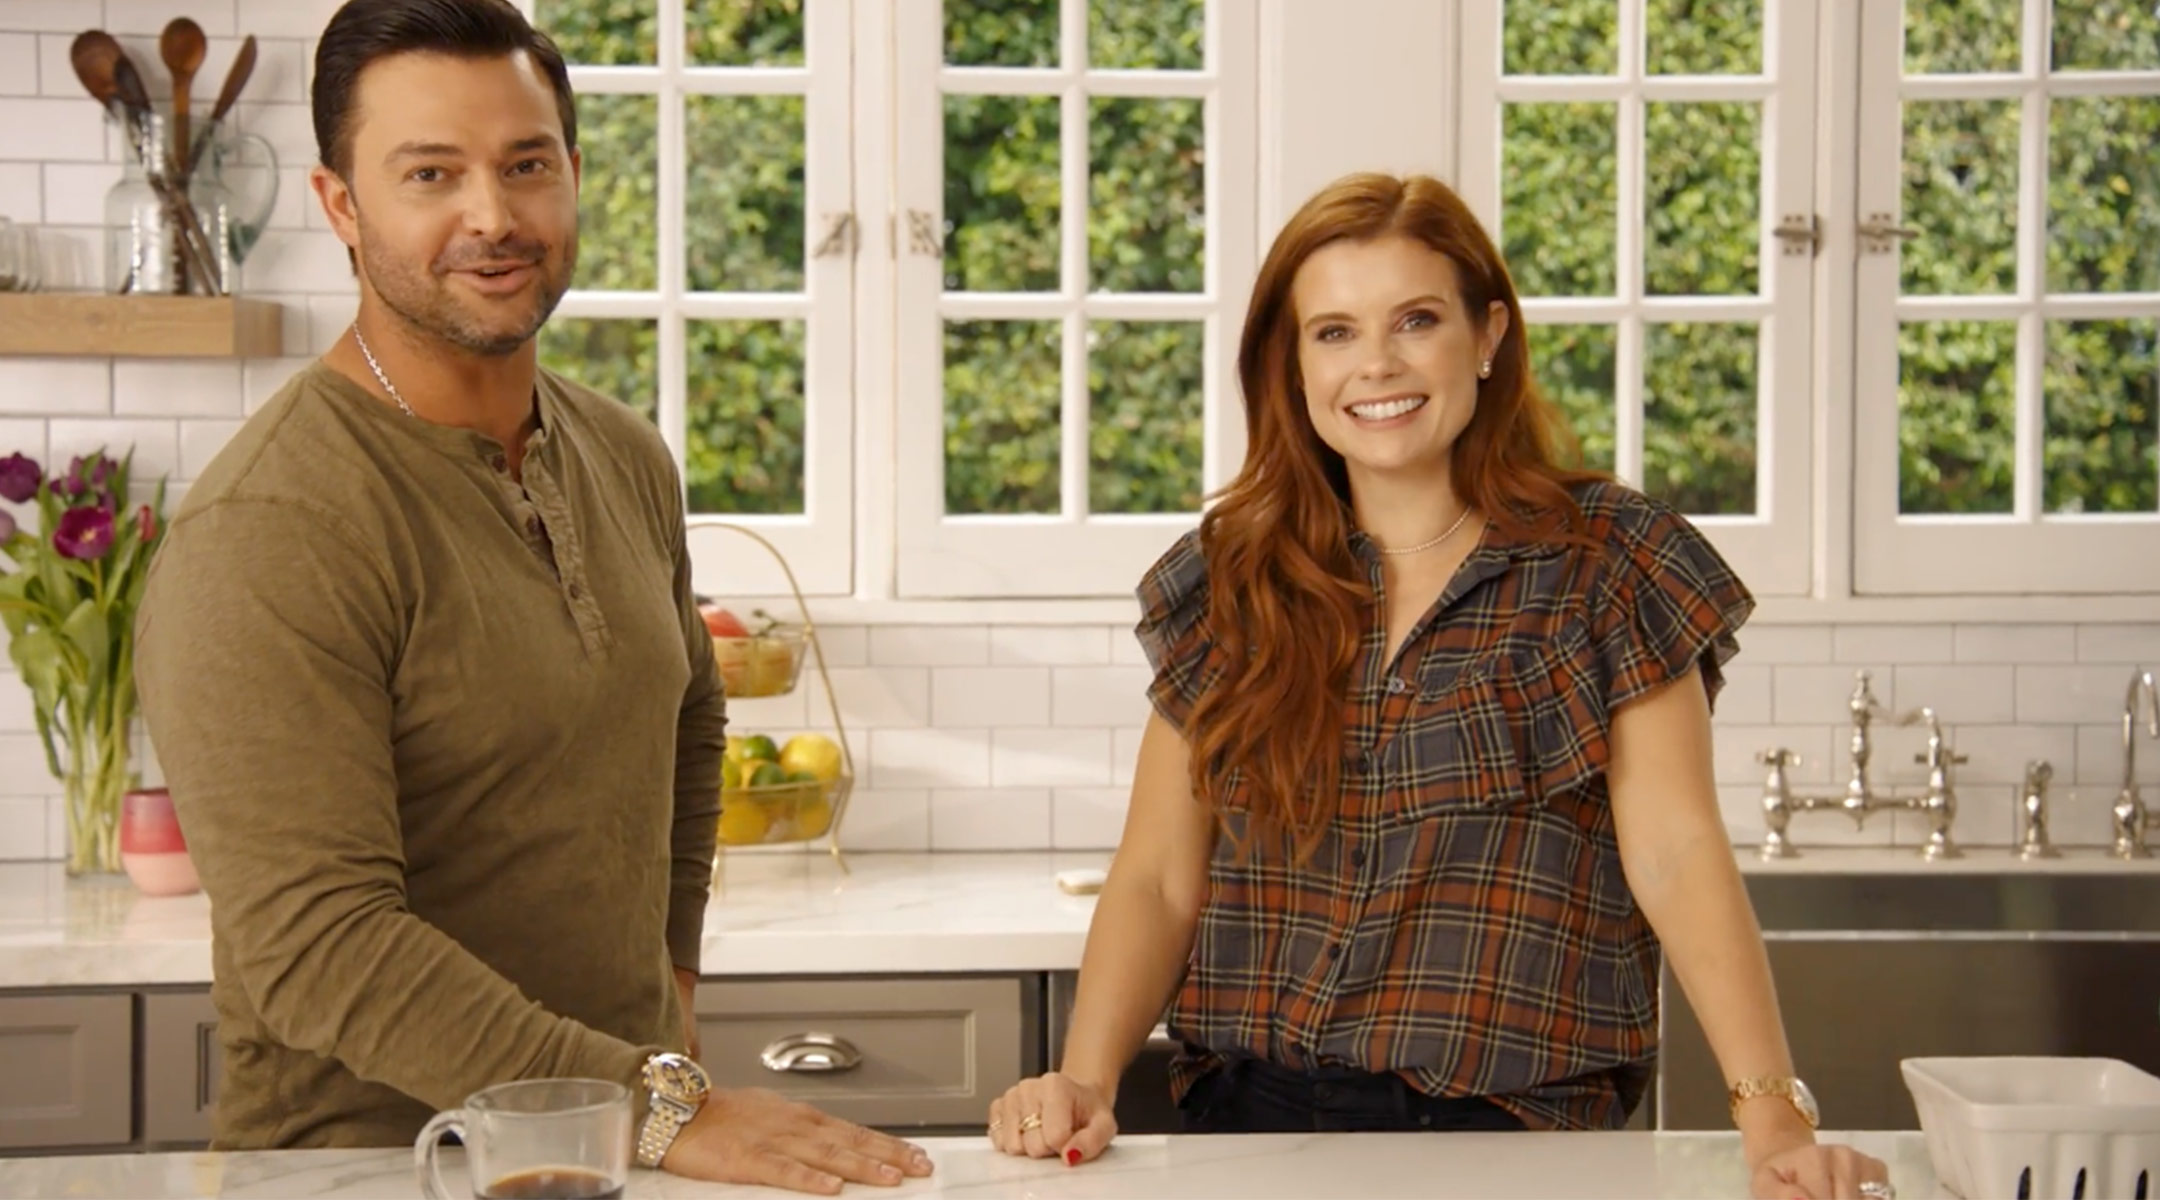 joanna garcia and nick swisher talk about their parenting style